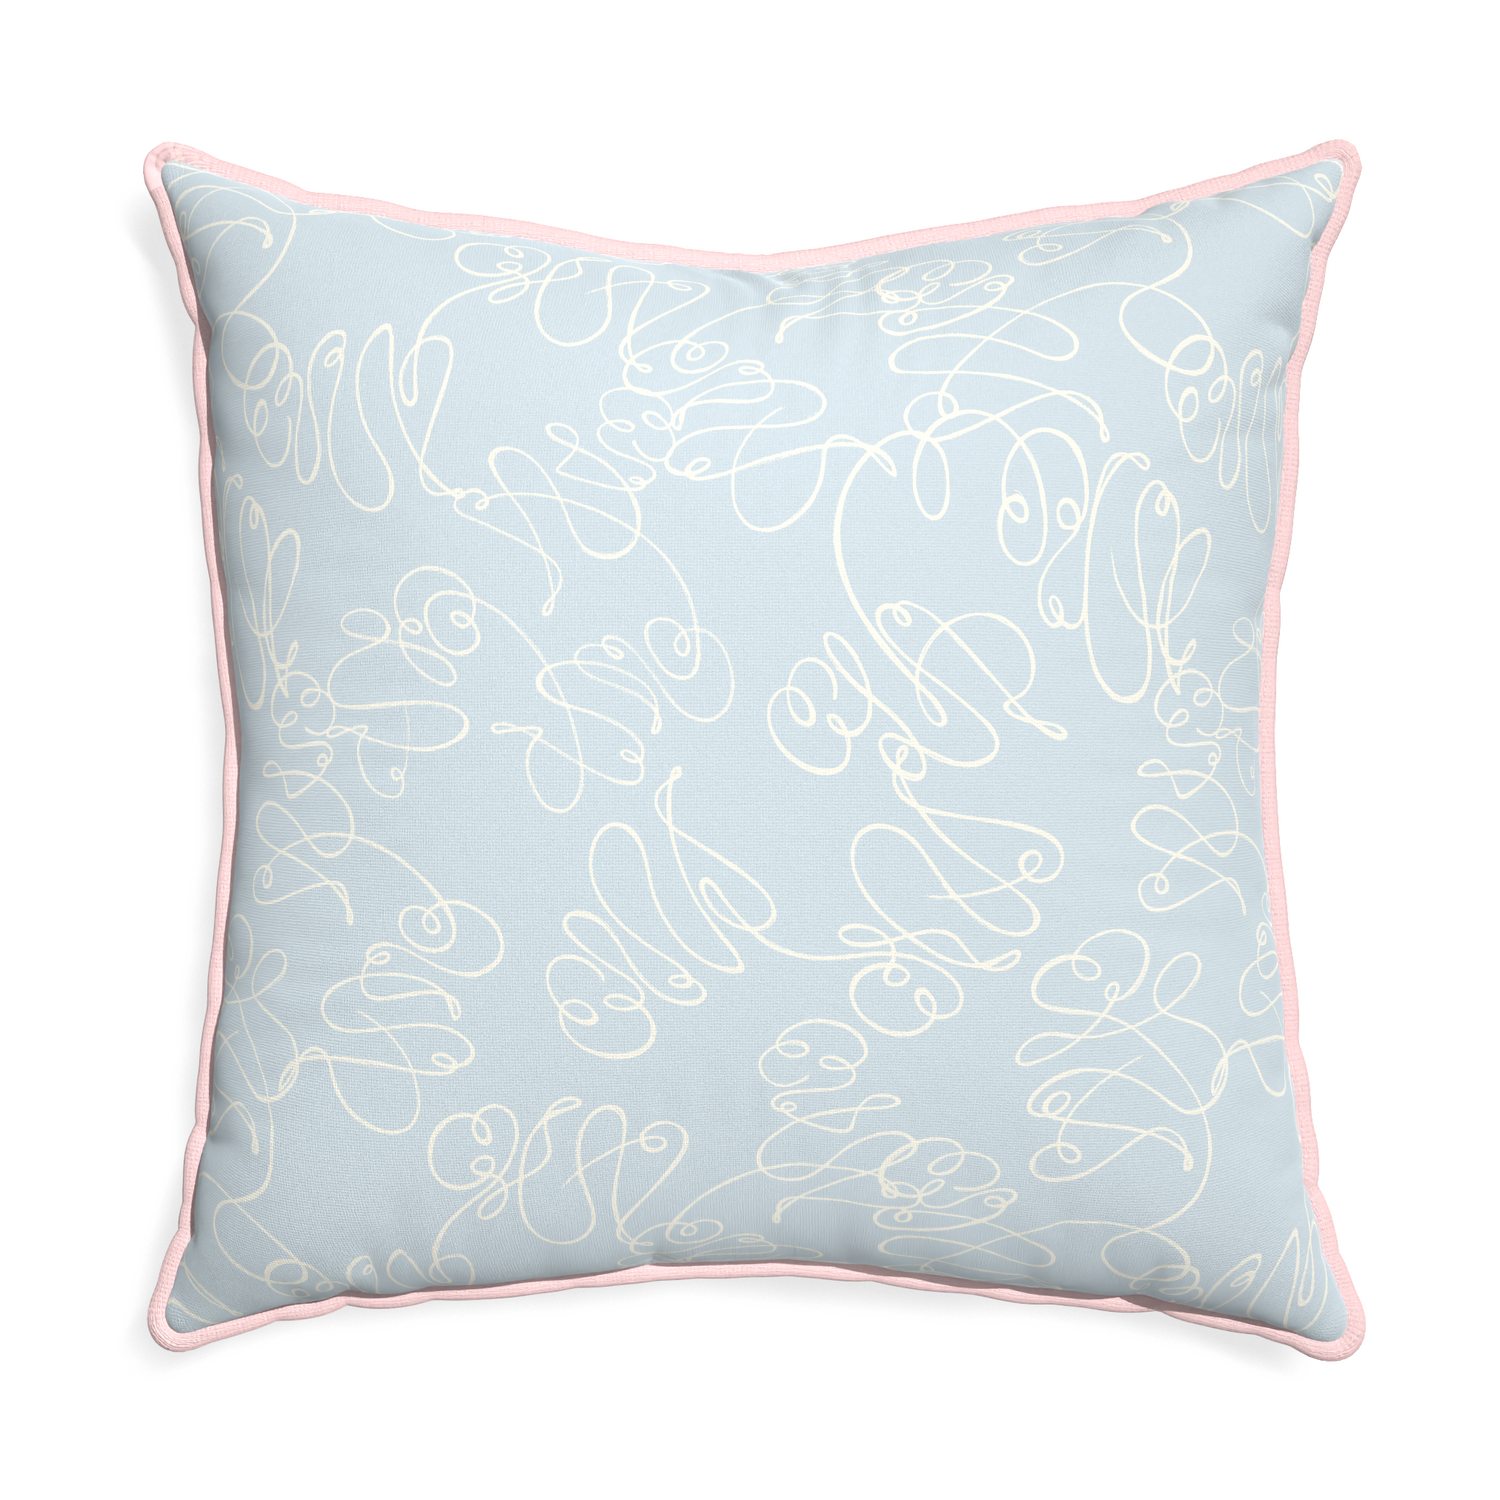 Euro-sham mirabella custom pillow with petal piping on white background